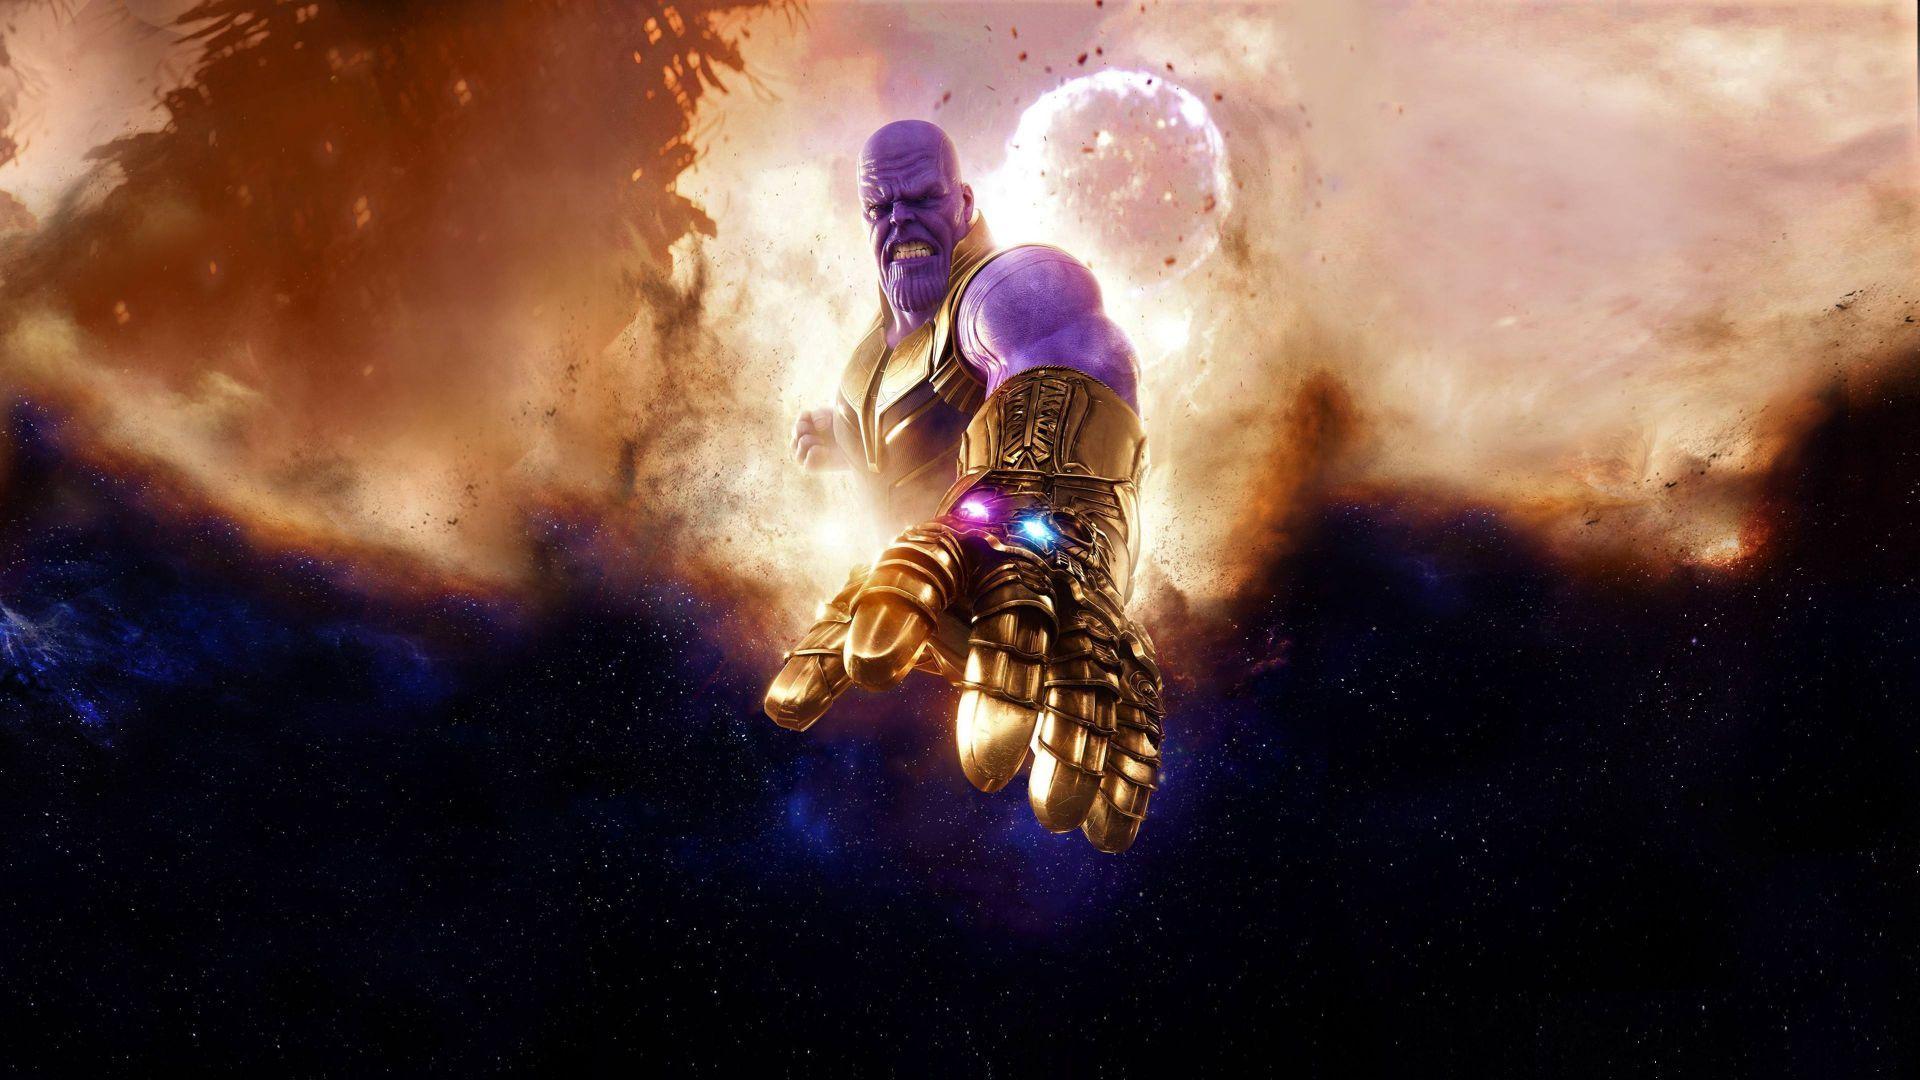 Download wallpaper of Thanos, Avengers: Infinity War, 4K, Movies